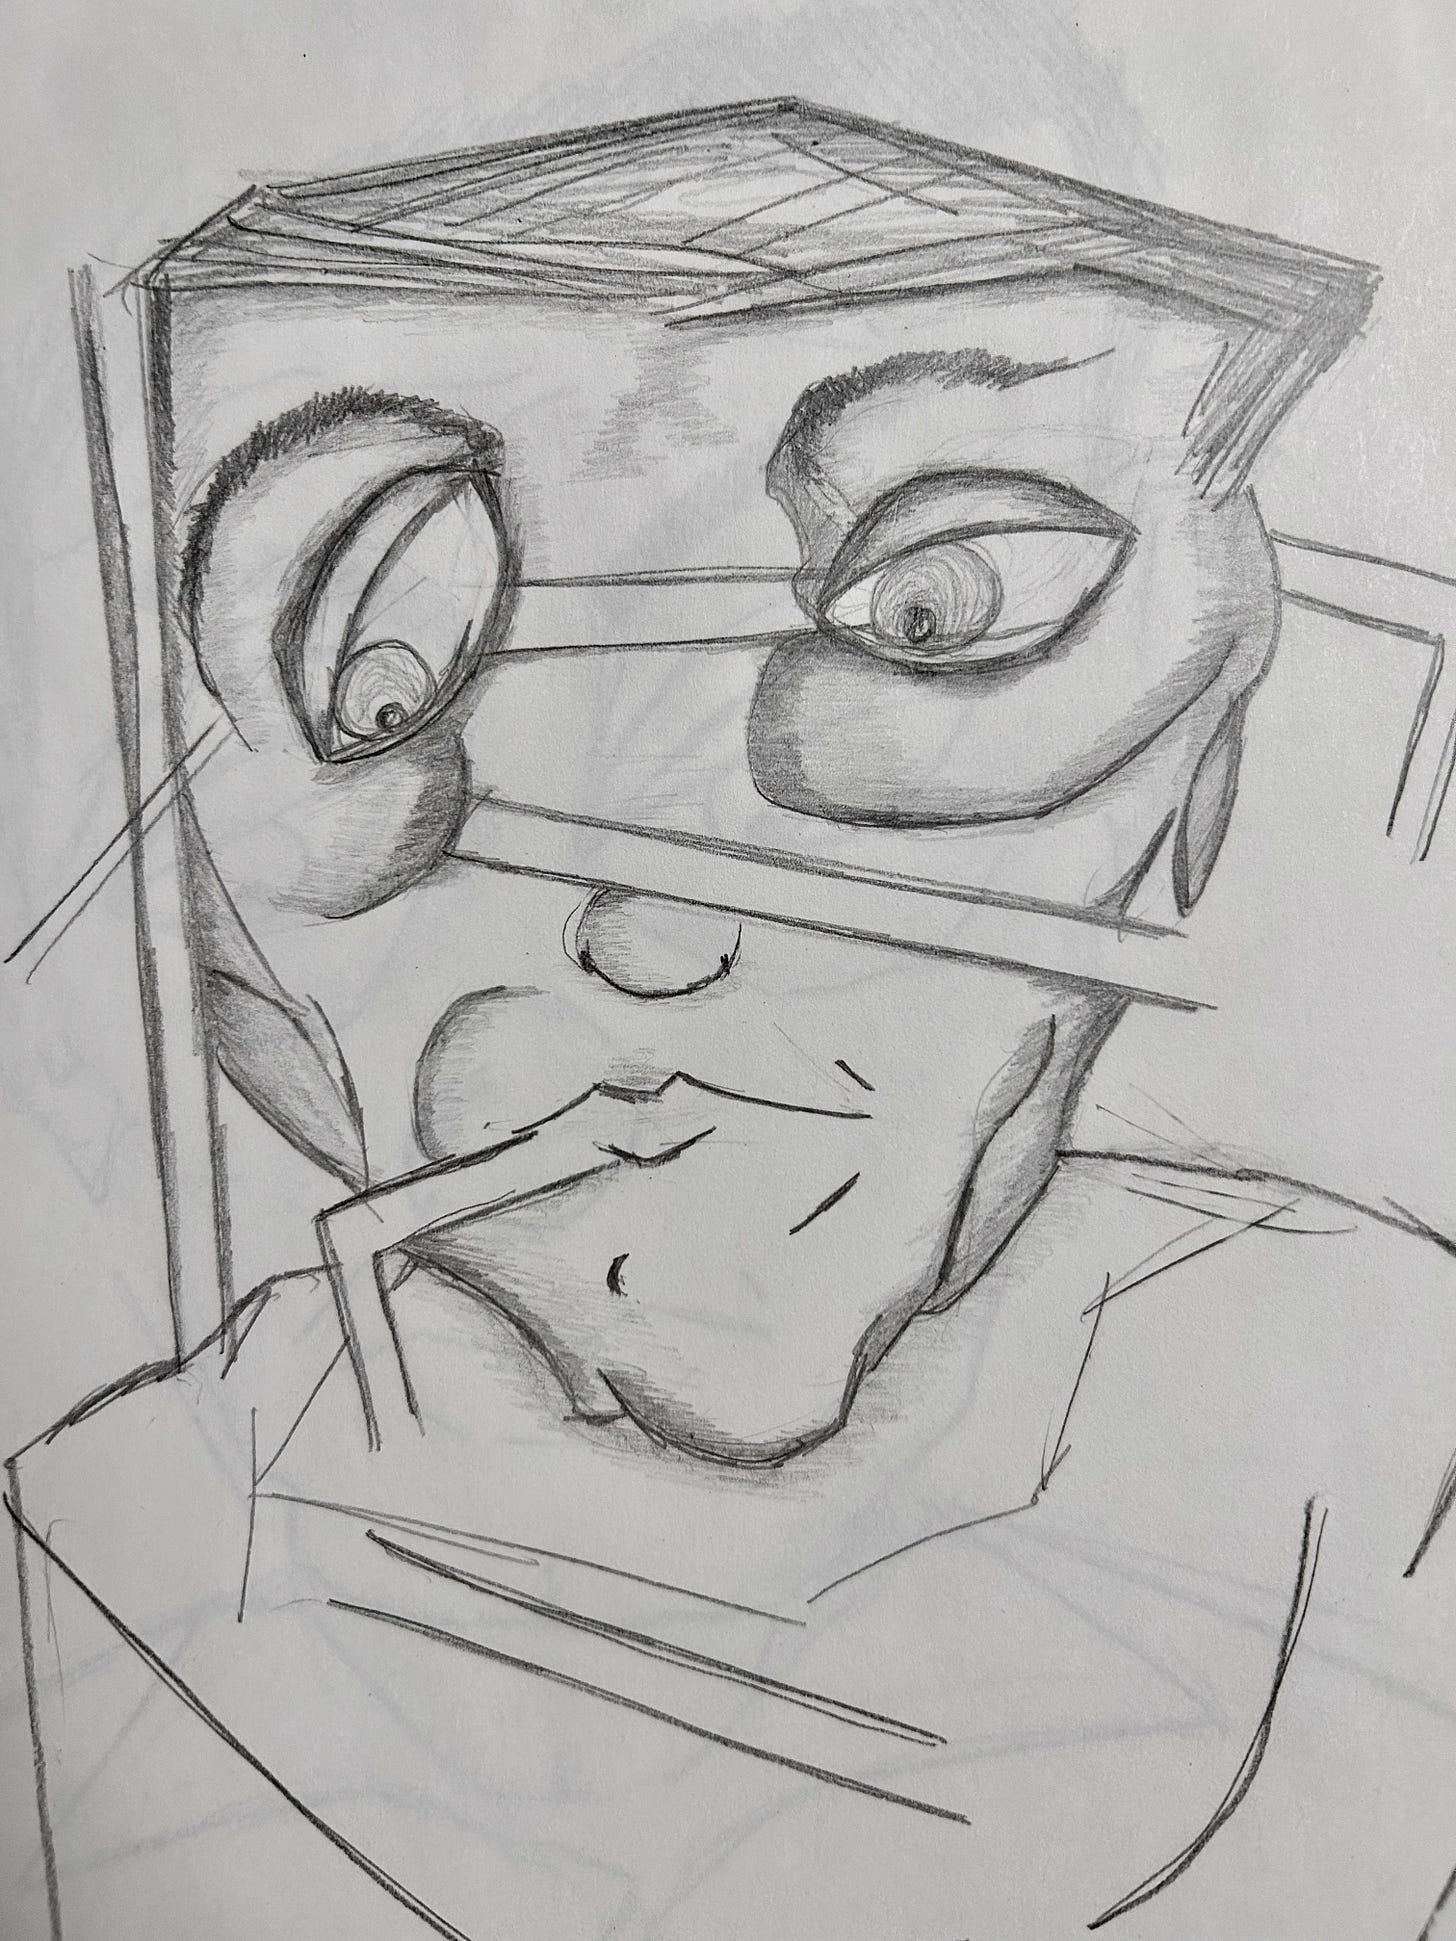 pencil drawing of a man's face, abstract